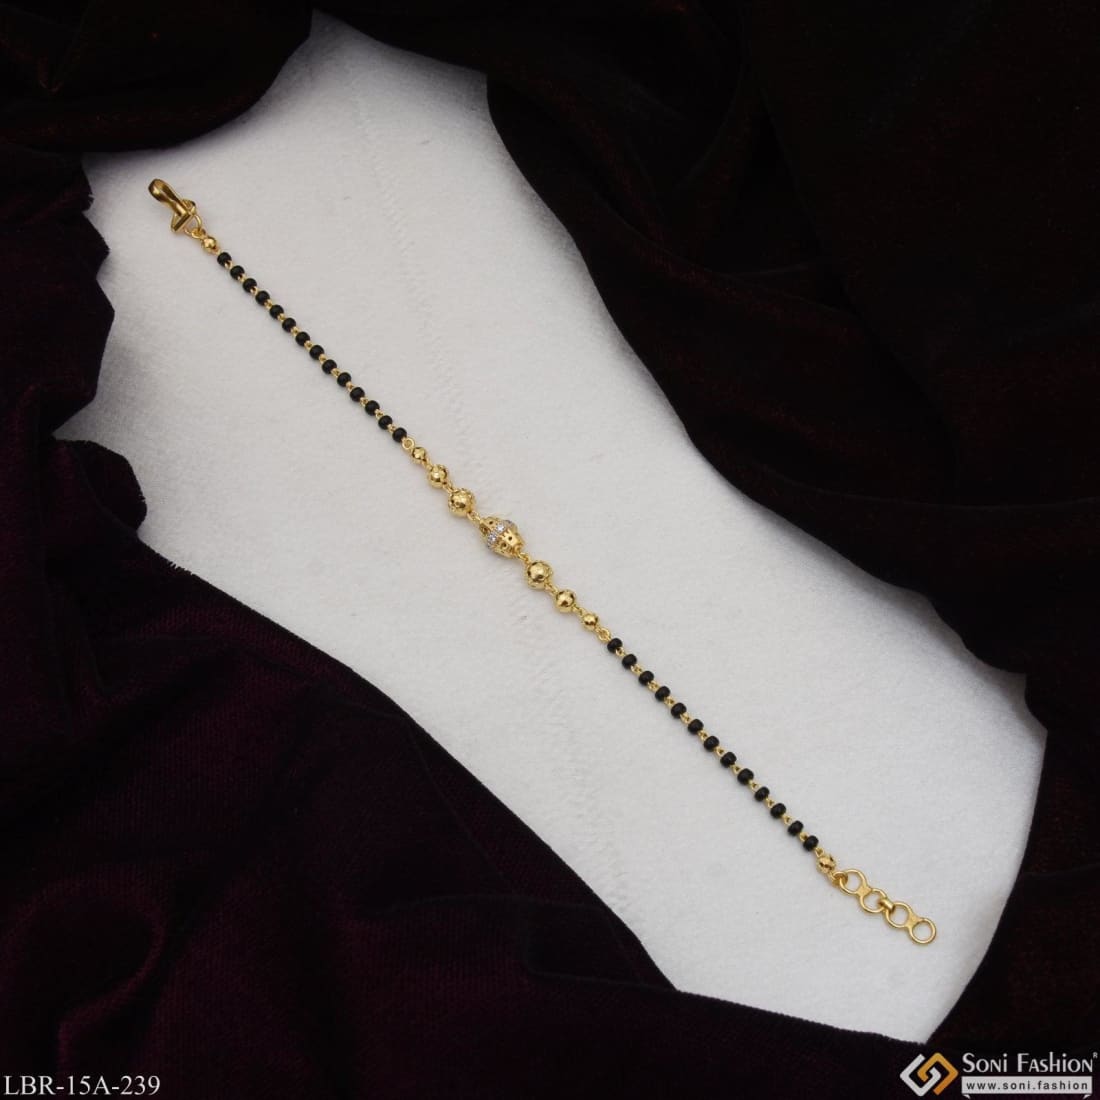 CaratLane: A Tanishq Partnership - A pretty mangalsutra bracelet that'll go  with all your classic white tops Take a closer look: https://bit.ly/3dn9NfW  | Facebook